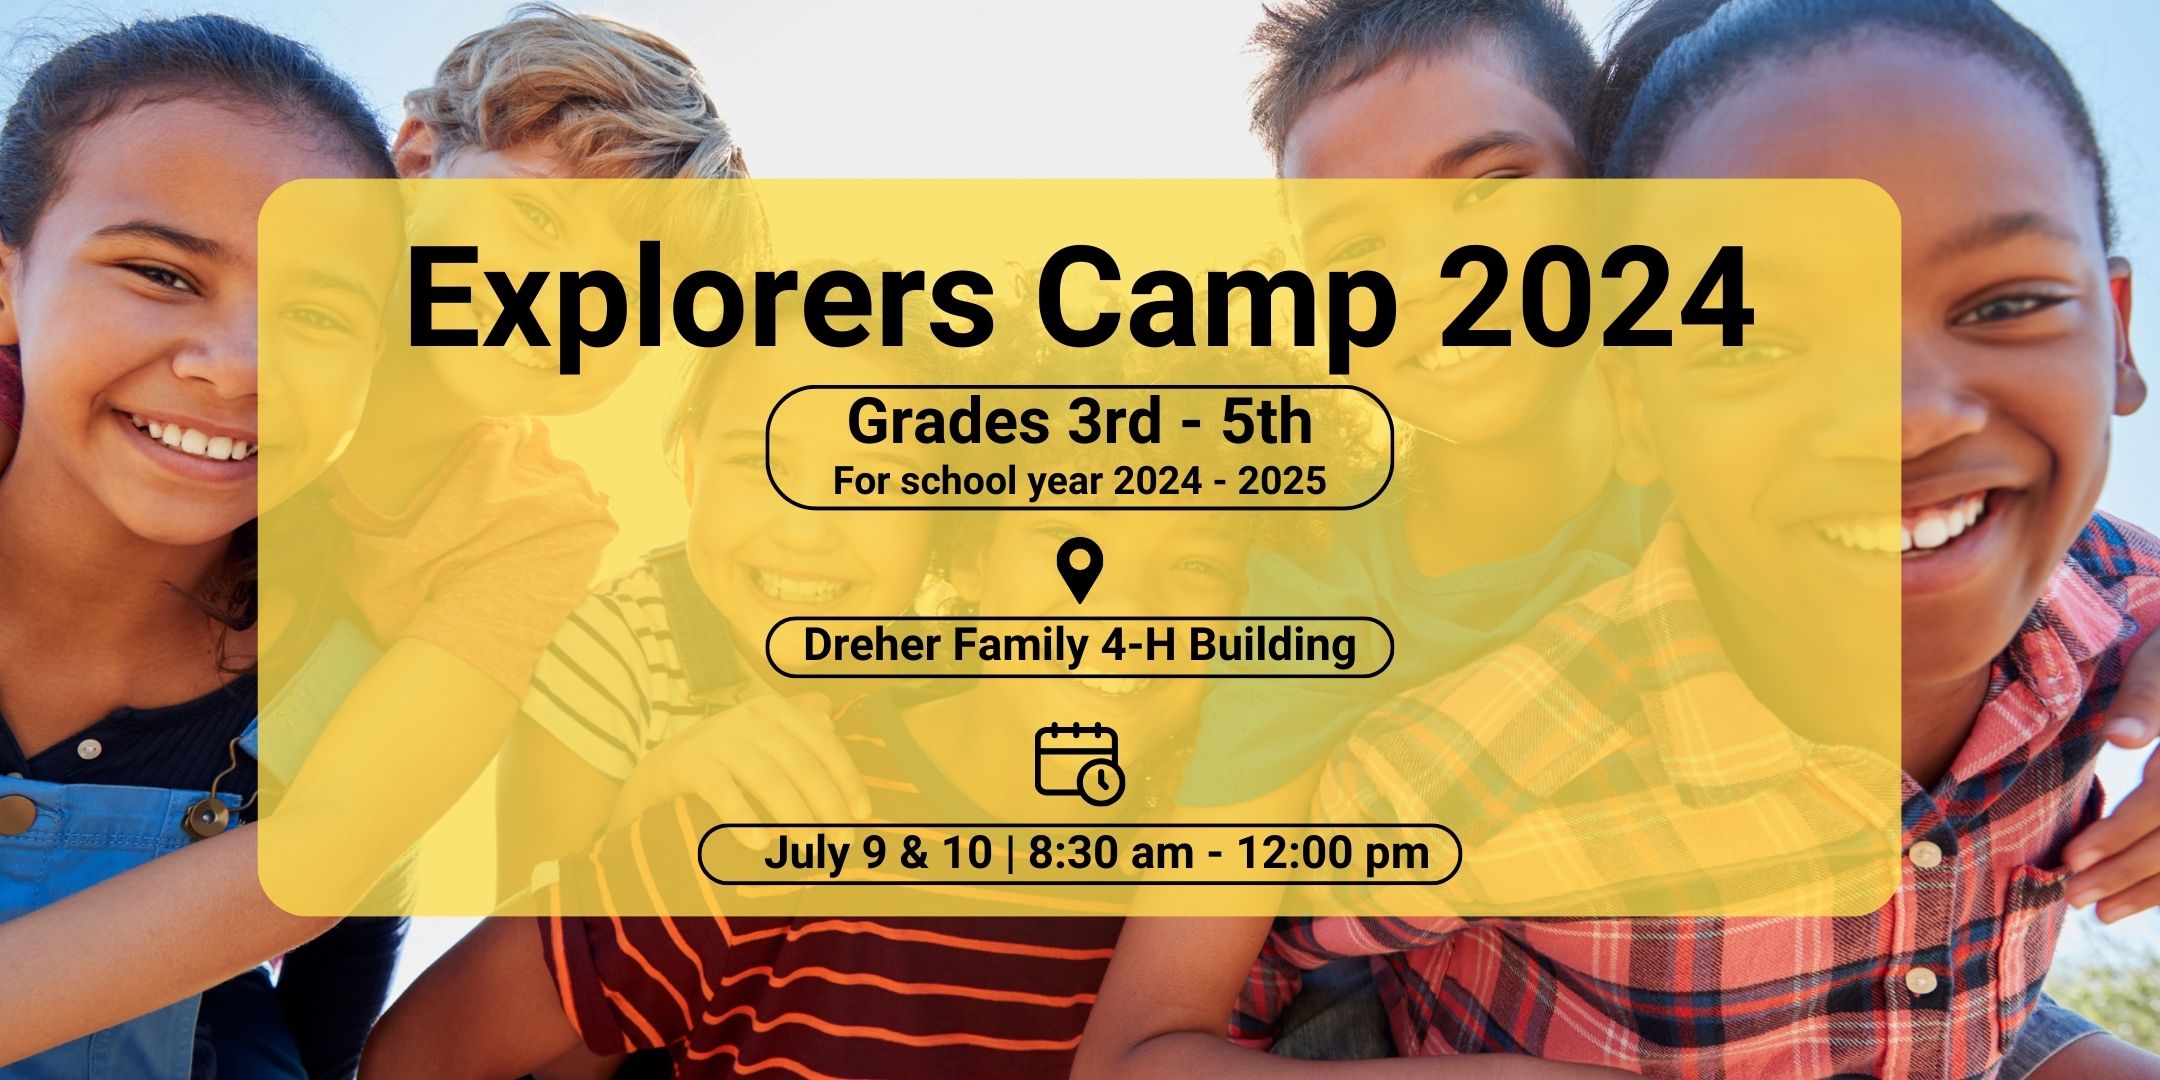 Dreher Family 4-H Building Explorer’s Camp 2024 July 9 & 10 | 8:30 am - 12:00 pm Grades 3rd - 5th For school year 2024 - 2025